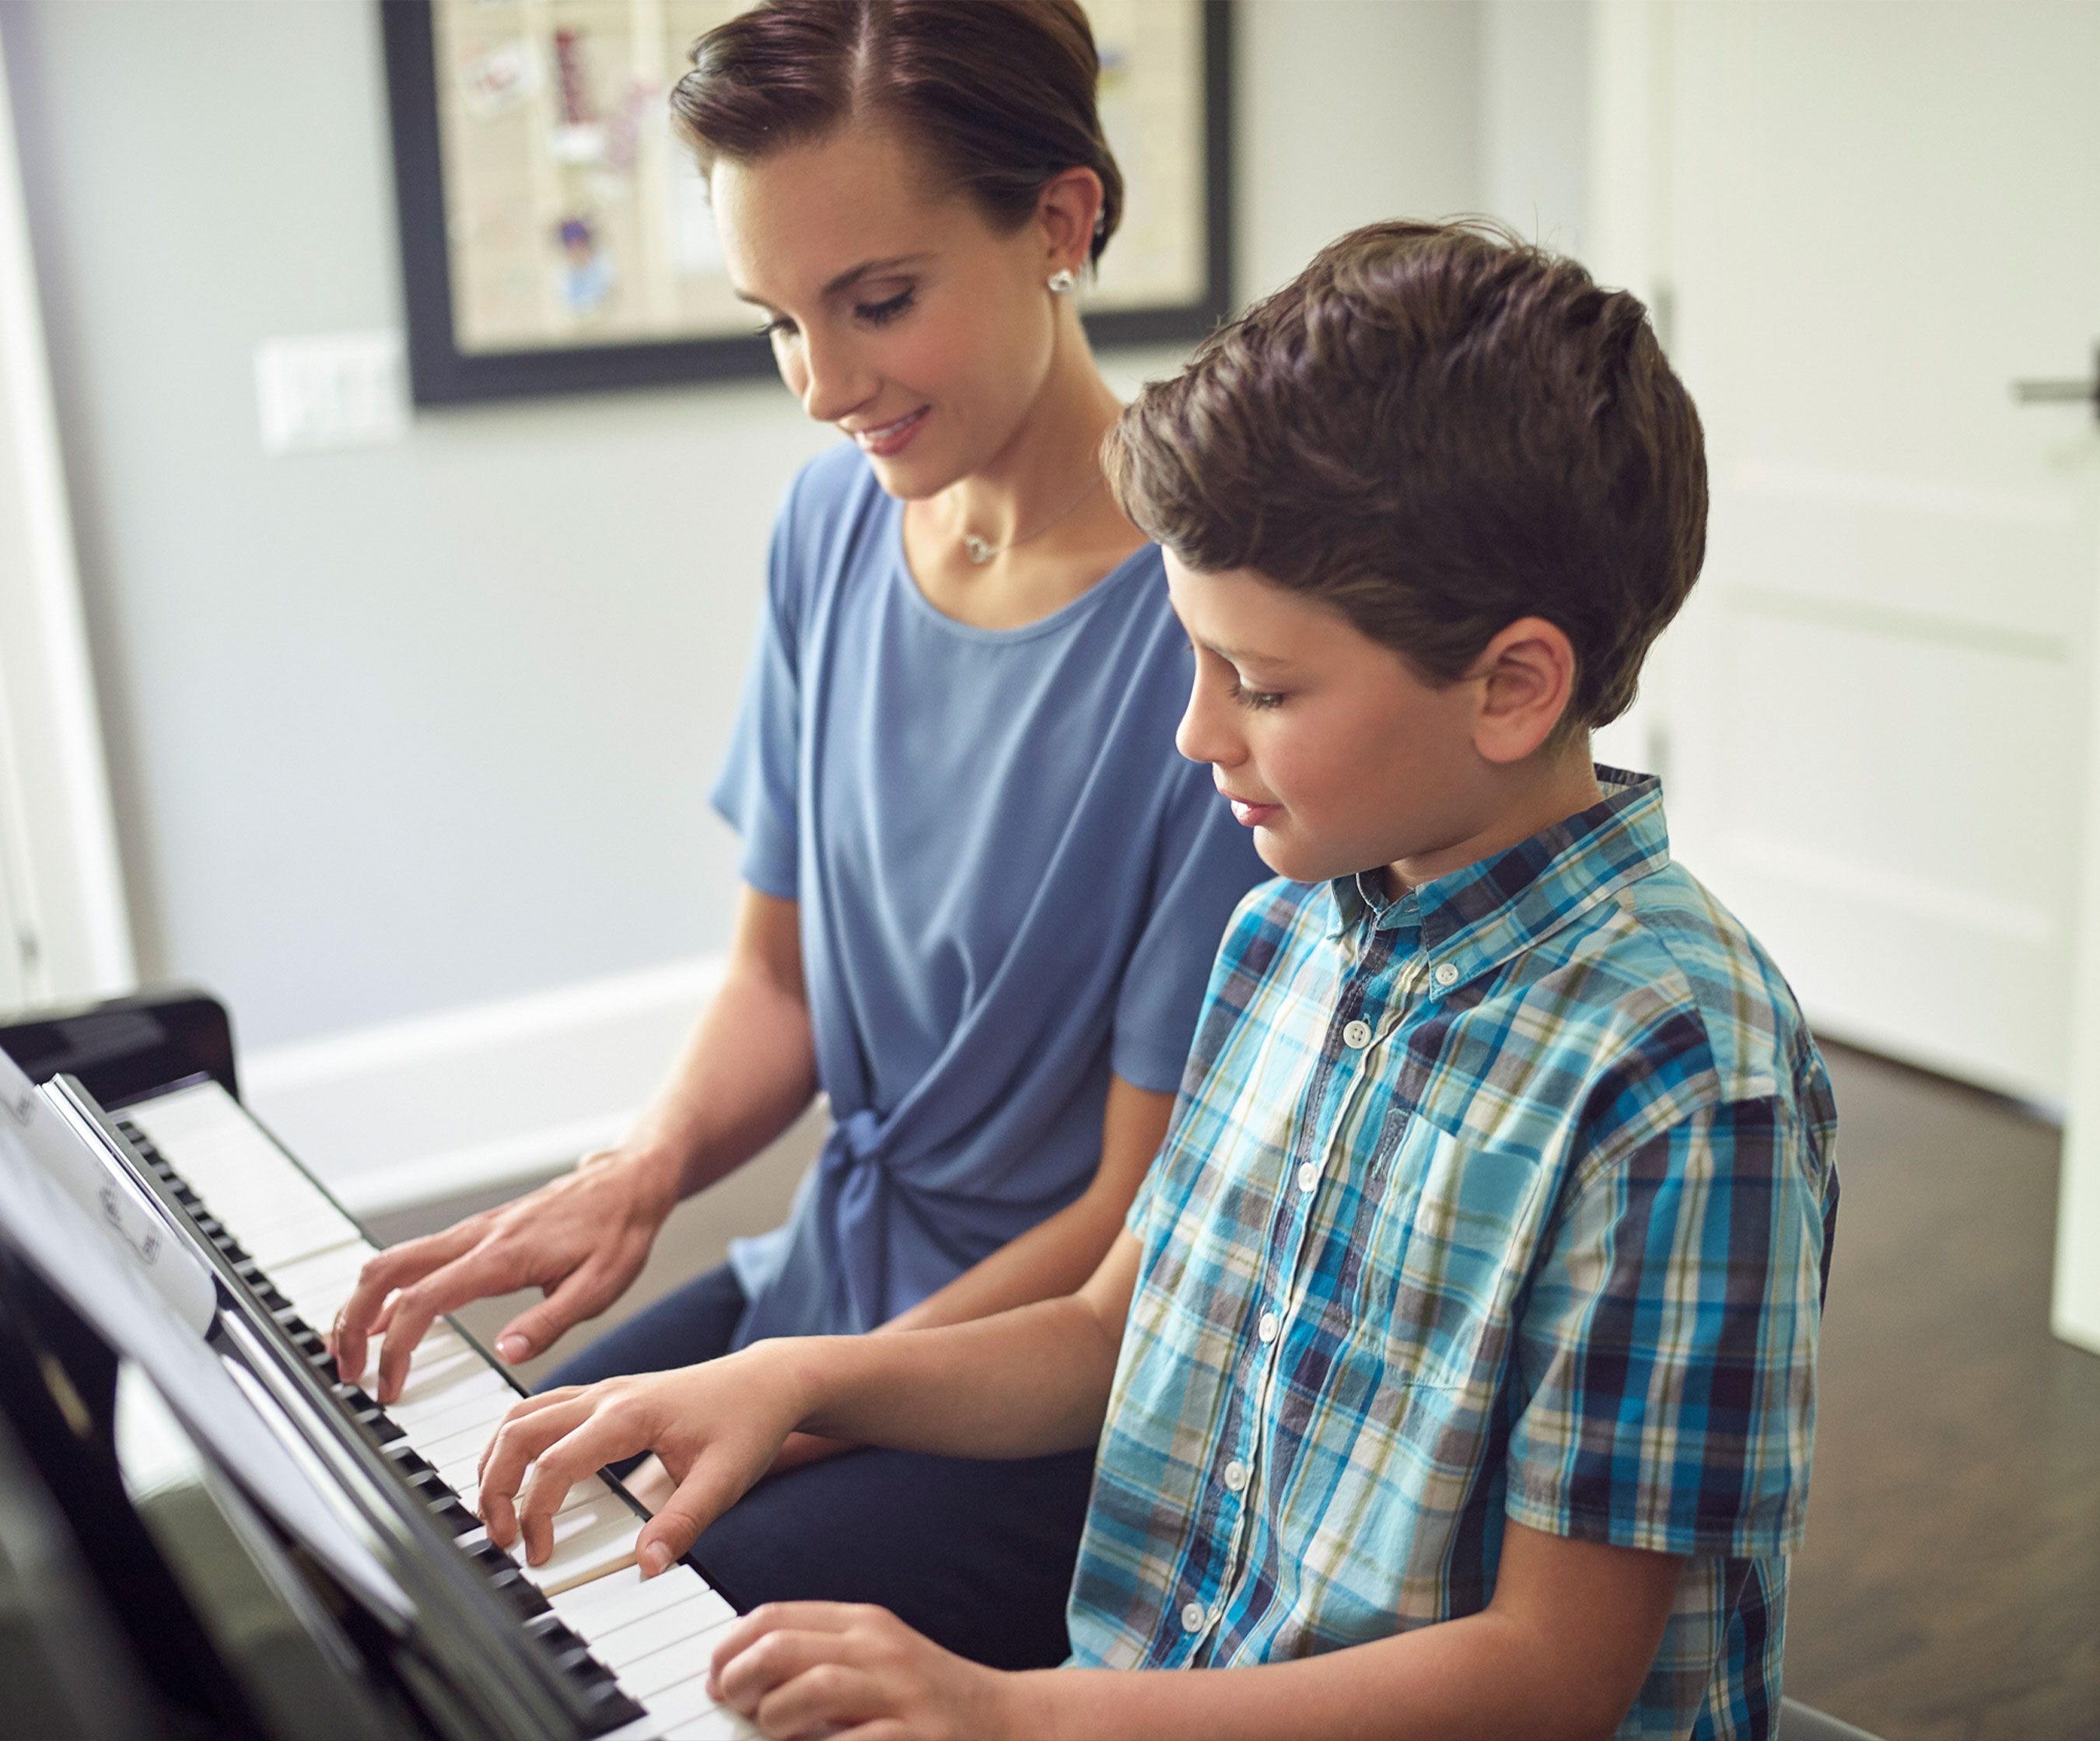 Visit YamahaPianos.com to find the right piano for your home and learn more about 0% APR financing for 18 months on select pianos